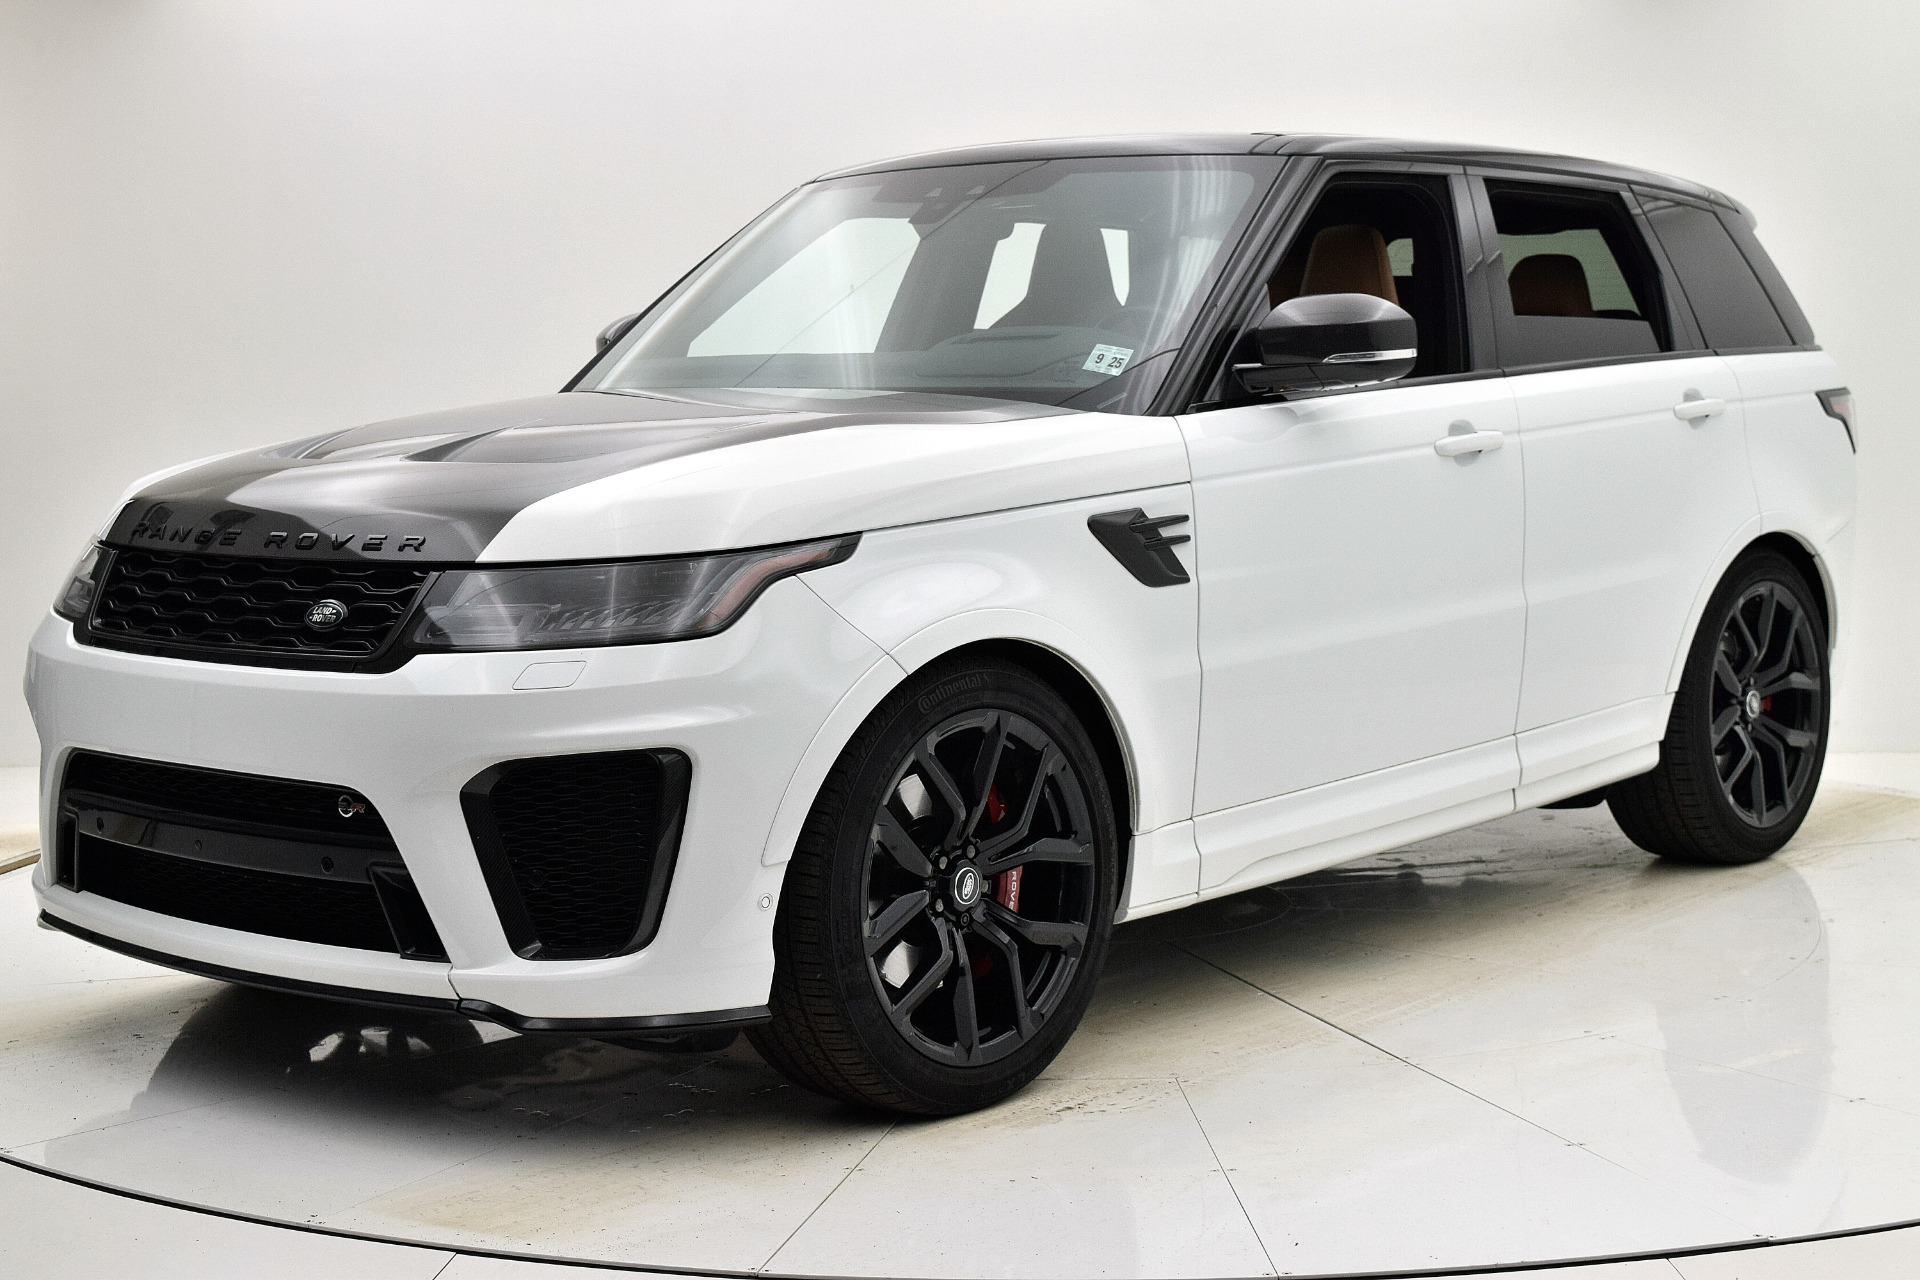 Used 2020 Land Rover Range Rover Sport SVR for sale Sold at Bentley Palmyra N.J. in Palmyra NJ 08065 2